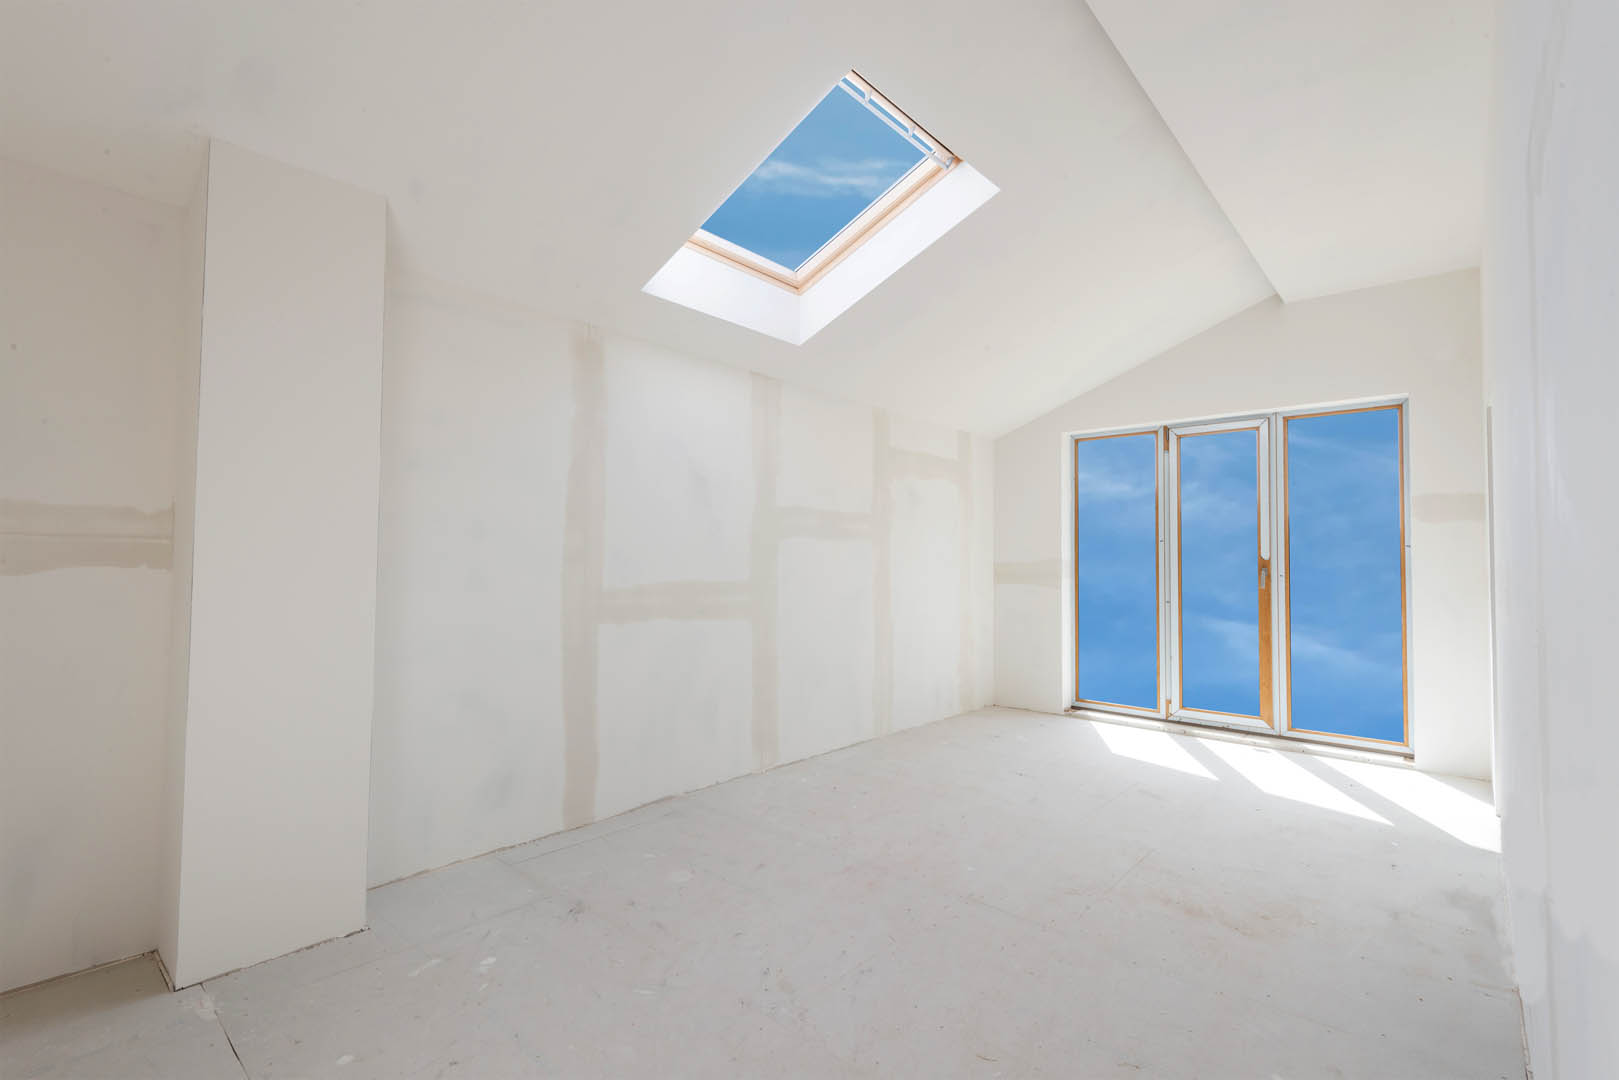 A room with a skylight and windows in it